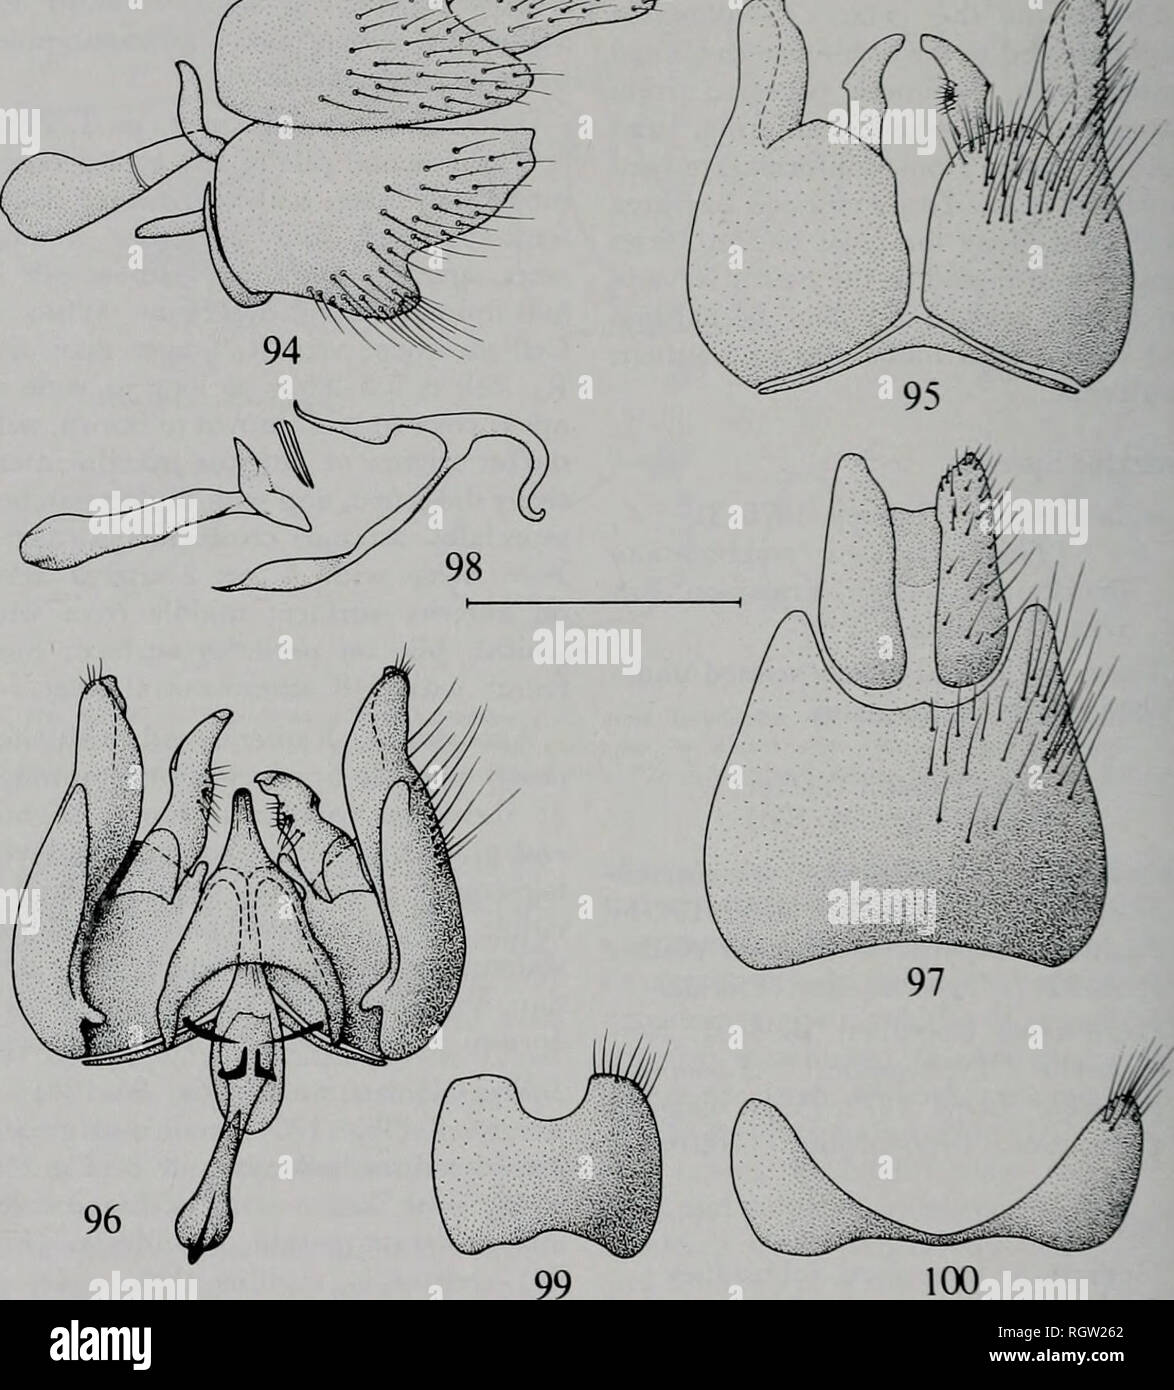 . Bulletin. Natural history; Natural history. 222 Illinois Natural History Survey Bulletin Vol. 32, Art. 3. Fig. 94—100. — Tabuda varia Wlk. mole terminalla. 94. — Genitalia in lateral view. 95. — Gono- coxites and hypandrium in ventral view. 96. — Gonocoxites with appendages and aedeagus in dorsol view. 97. — Epandrium with appendages in dorsal view. 98. — Aedeagus in laterol view. 99. — Sternite 8. 100. — Tergite 8. Scale; 0.5 mm. proximal portion of ejaculatoiy apodeme; ventral apodeme large, narrowly spoon shaped distally; ejaculatory apodeme has enlarged proximal and distal sections; vent Stock Photo